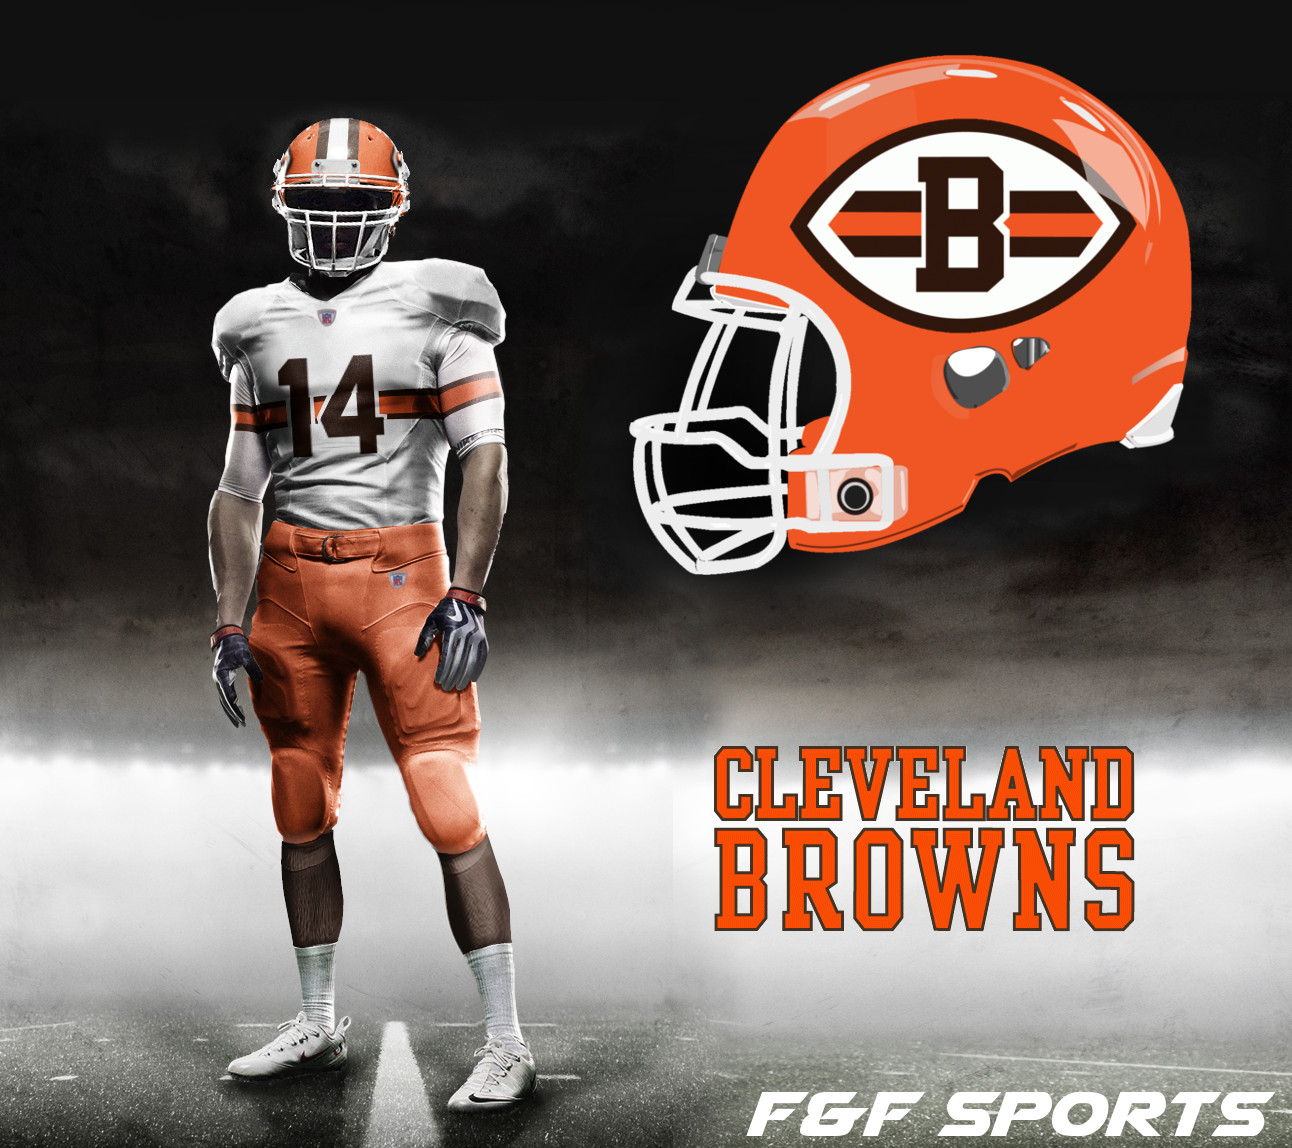 browns jersey redesign